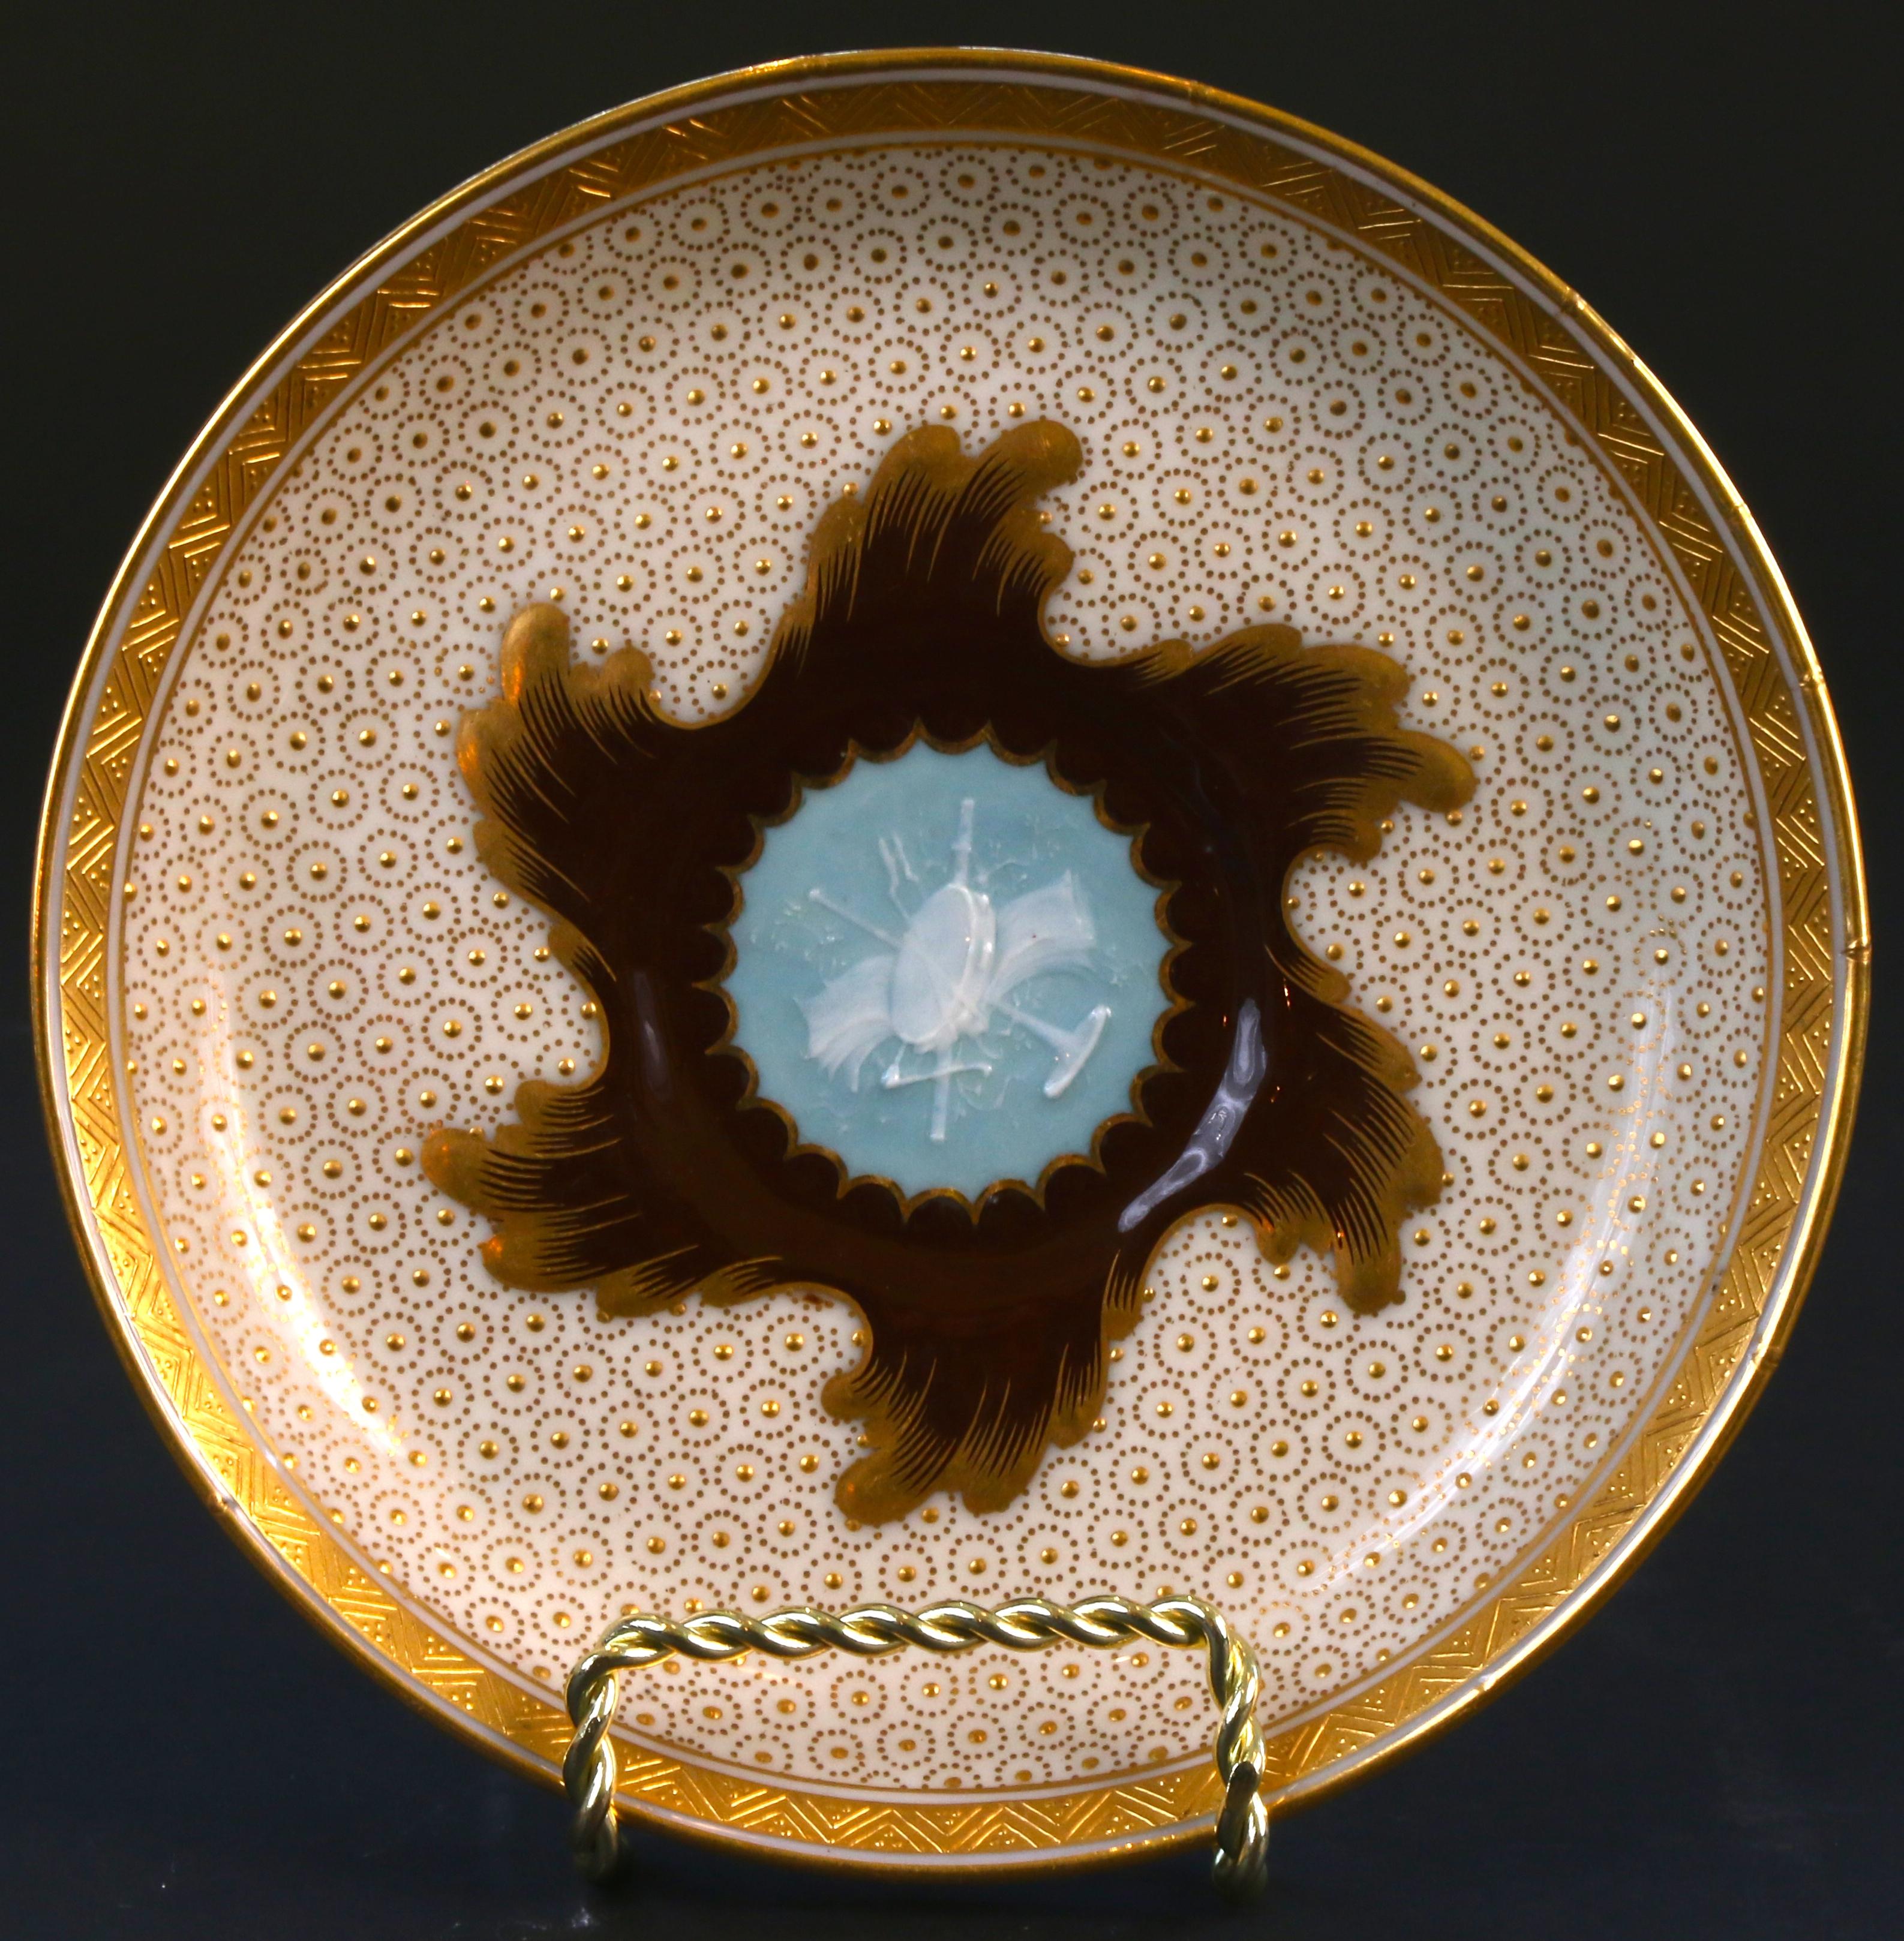 Hand-Painted Antique Minton Pate-Sur-Pate Cup and Saucer, by artist Albion Birks